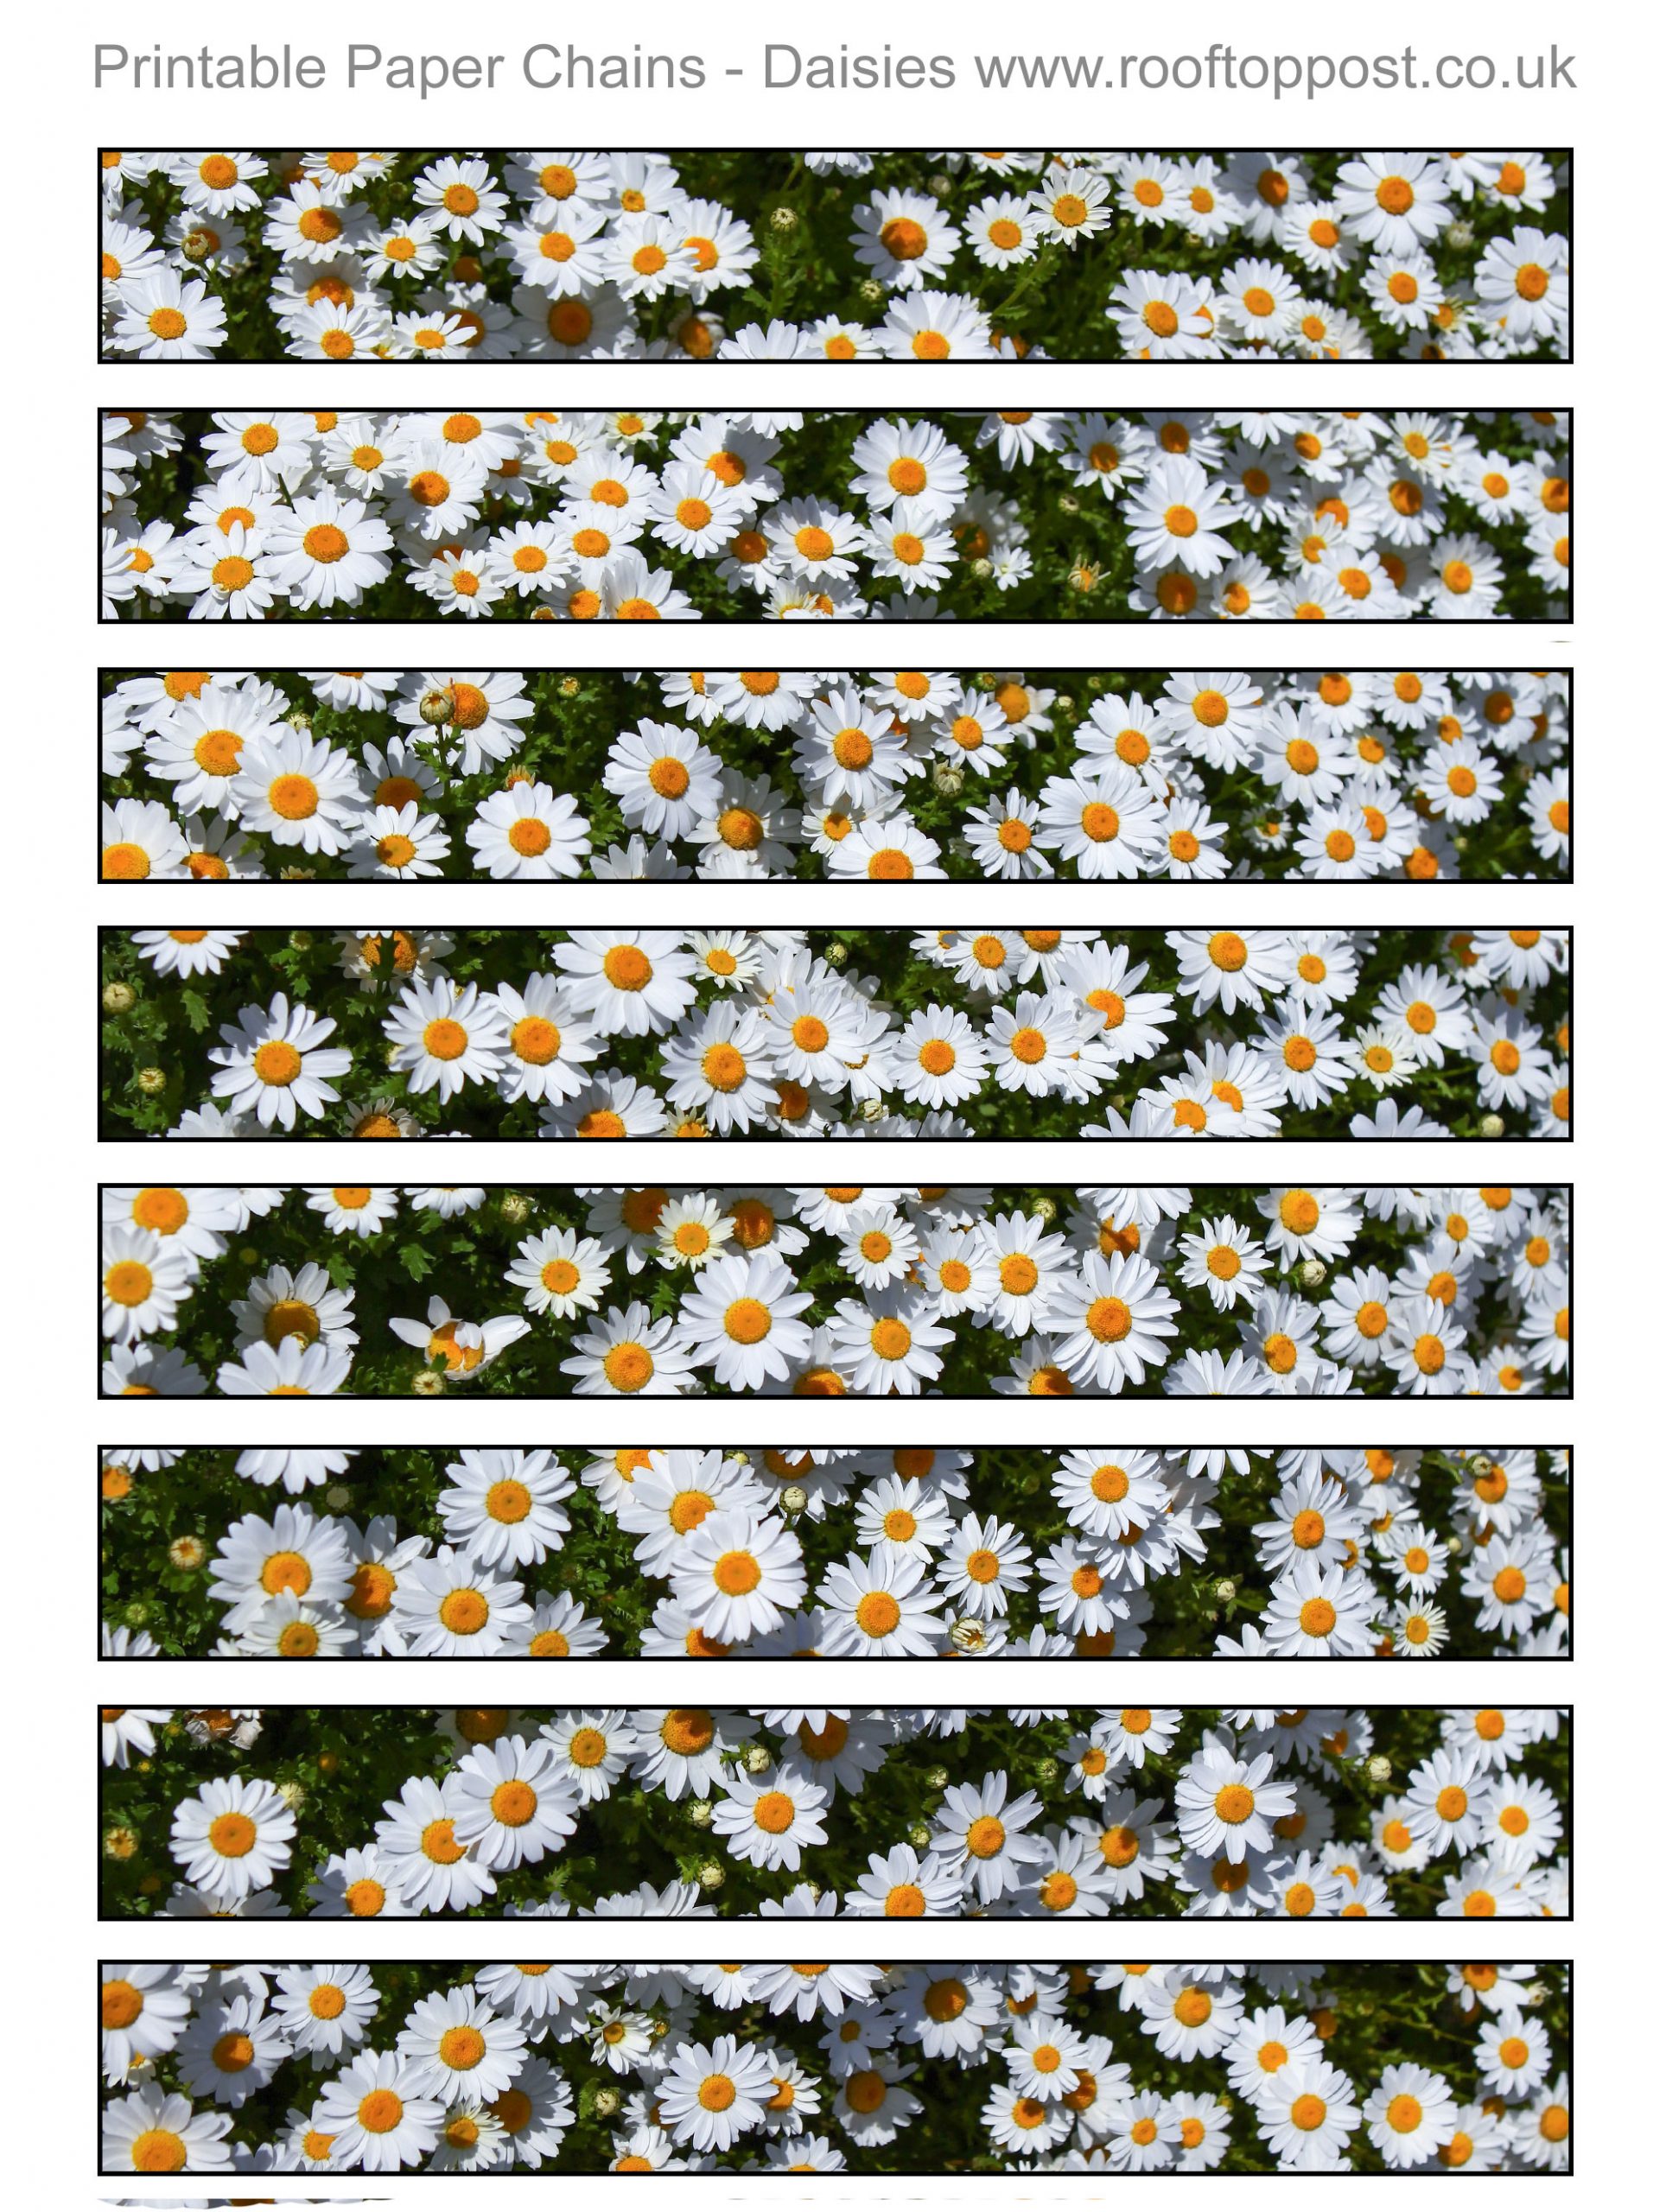 Printable paper chain with a daisy design